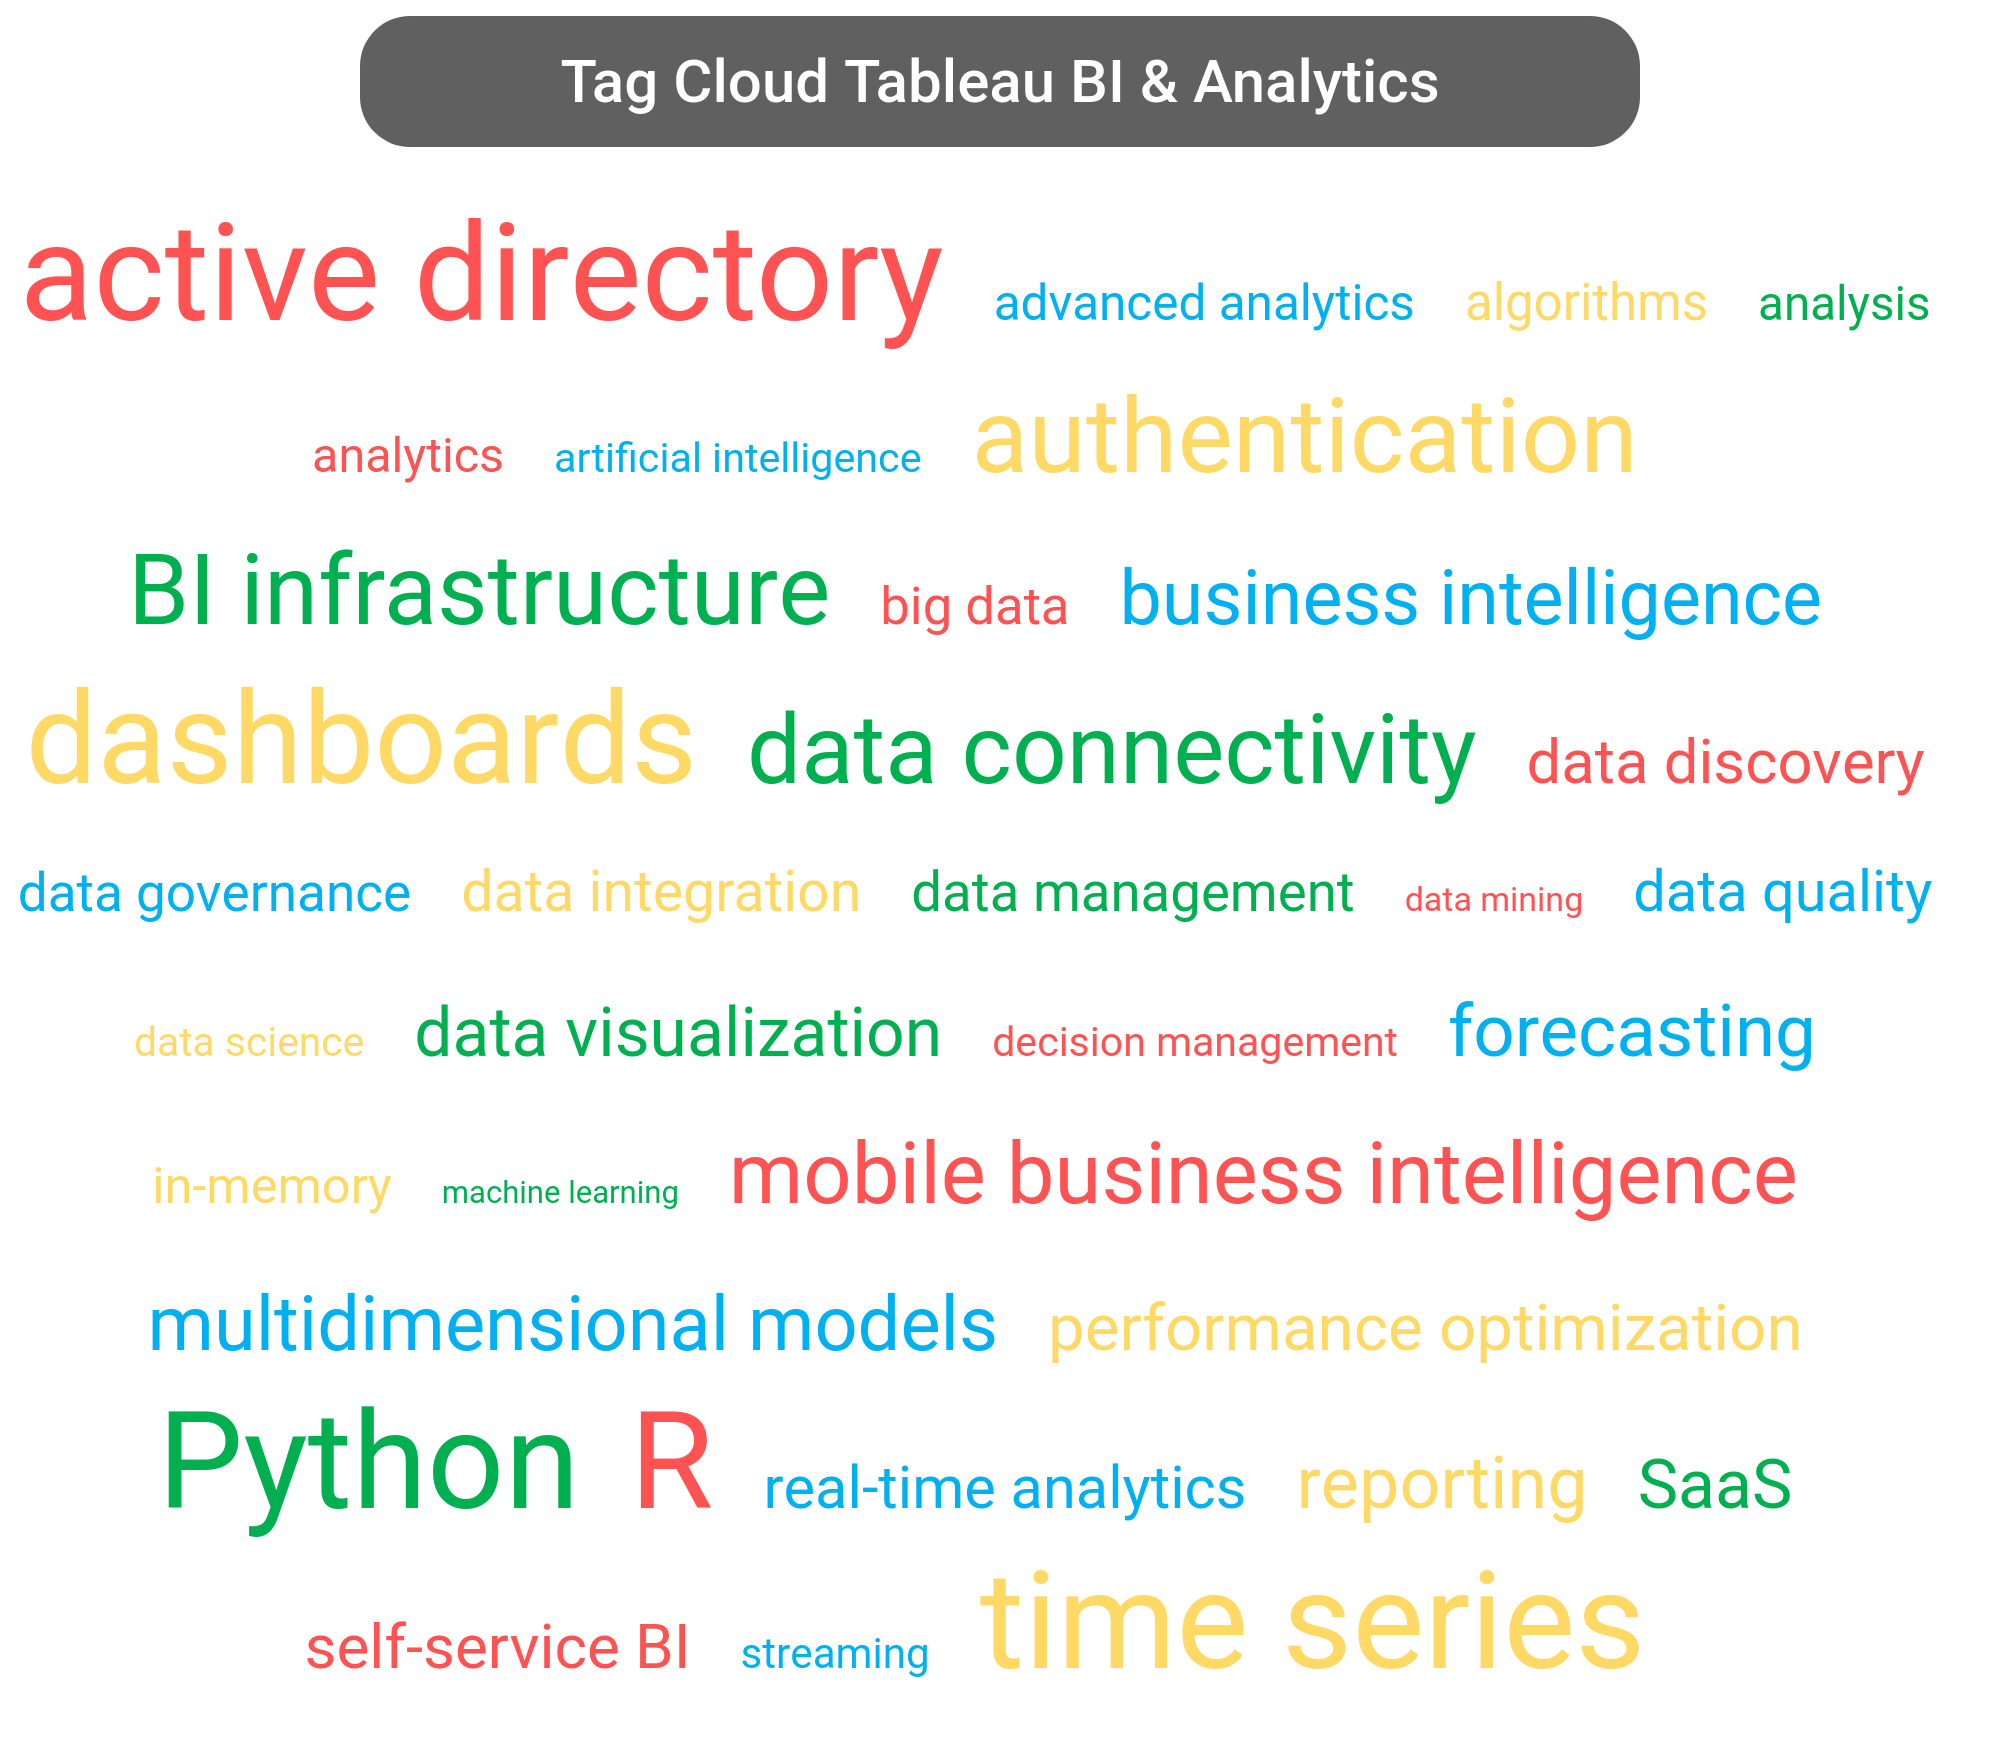 Tag cloud of the Tableau Business Intelligence tools.